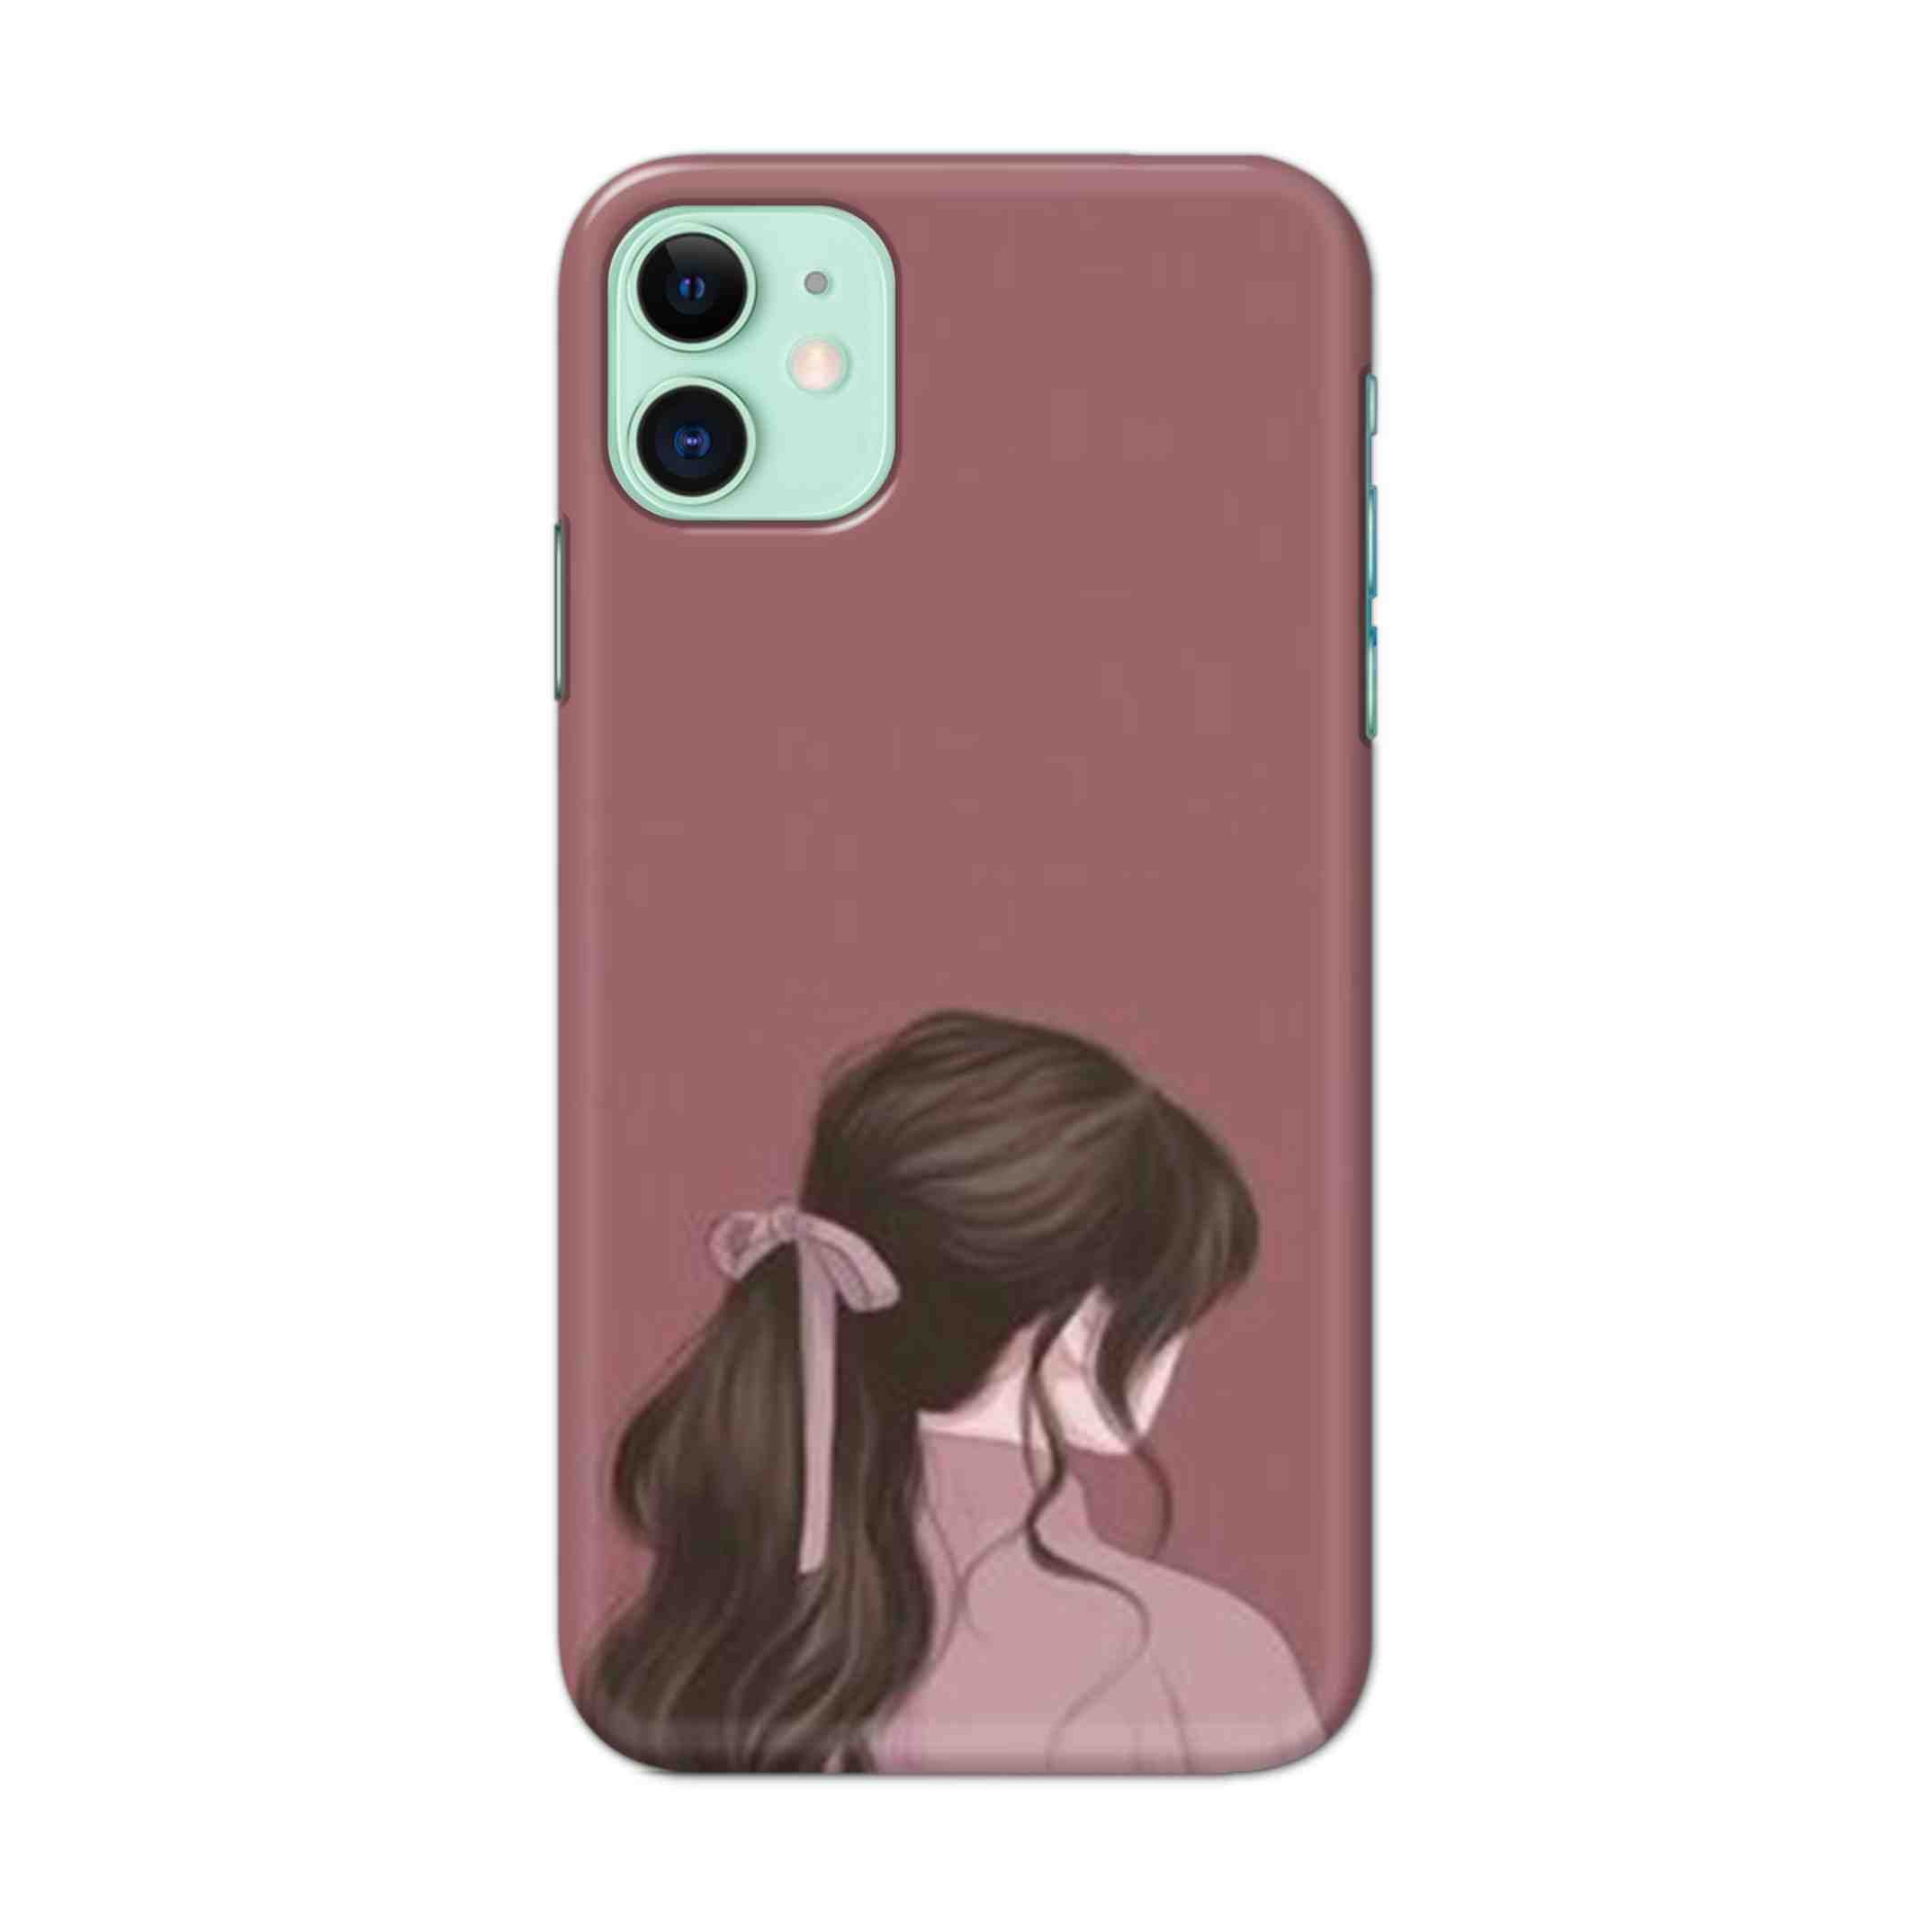 Buy Pink Girl Hard Back Mobile Phone Case Cover For iPhone 11 Online